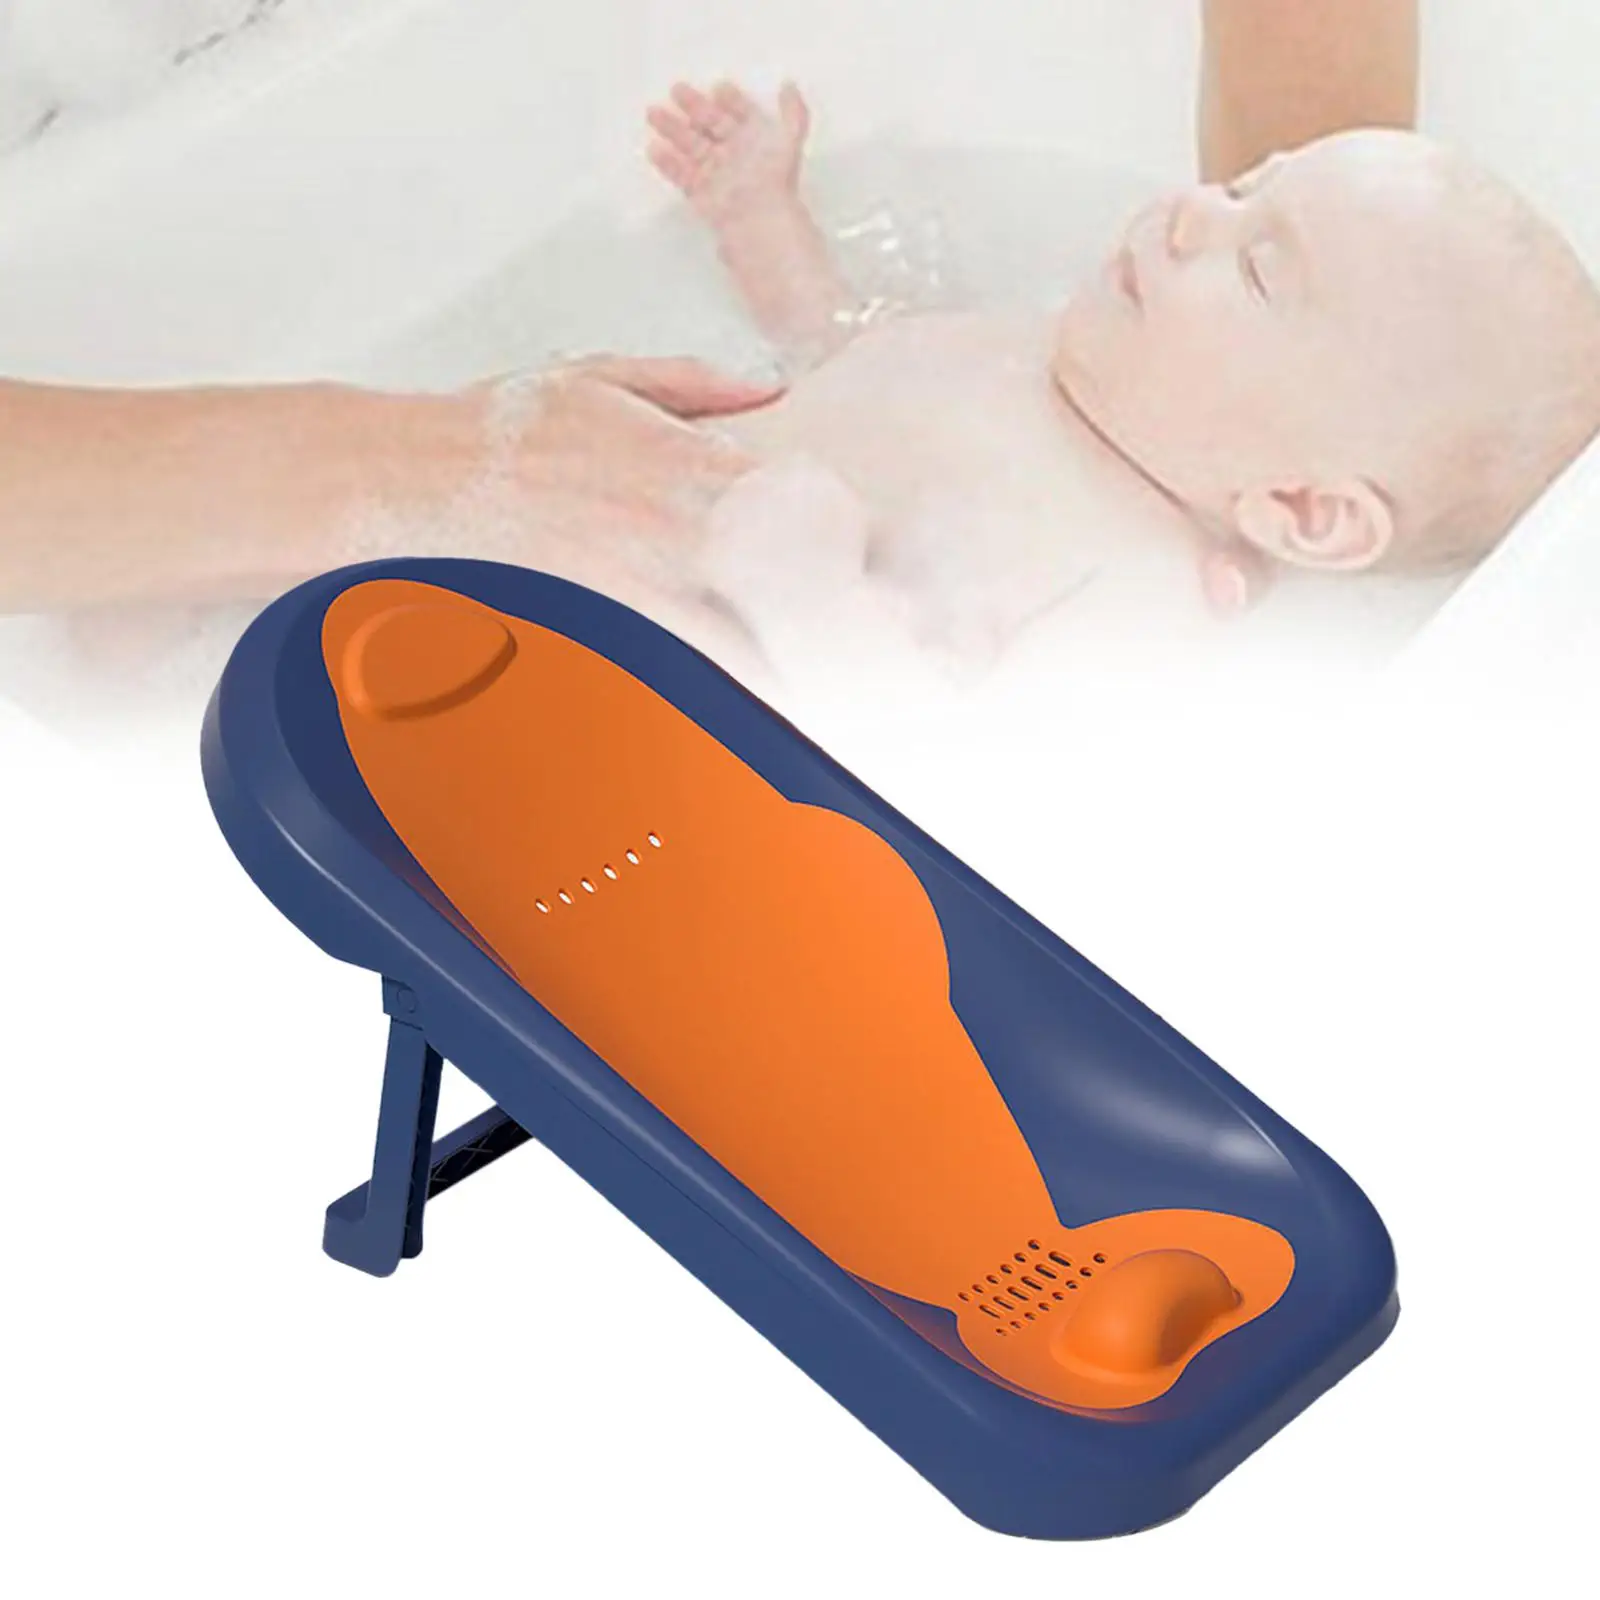 bath Seat Support Rack Thicken Soft Non Slip Use from Birth until Sitting up Lounger Bathtub Mat for Baby Infant Toddler